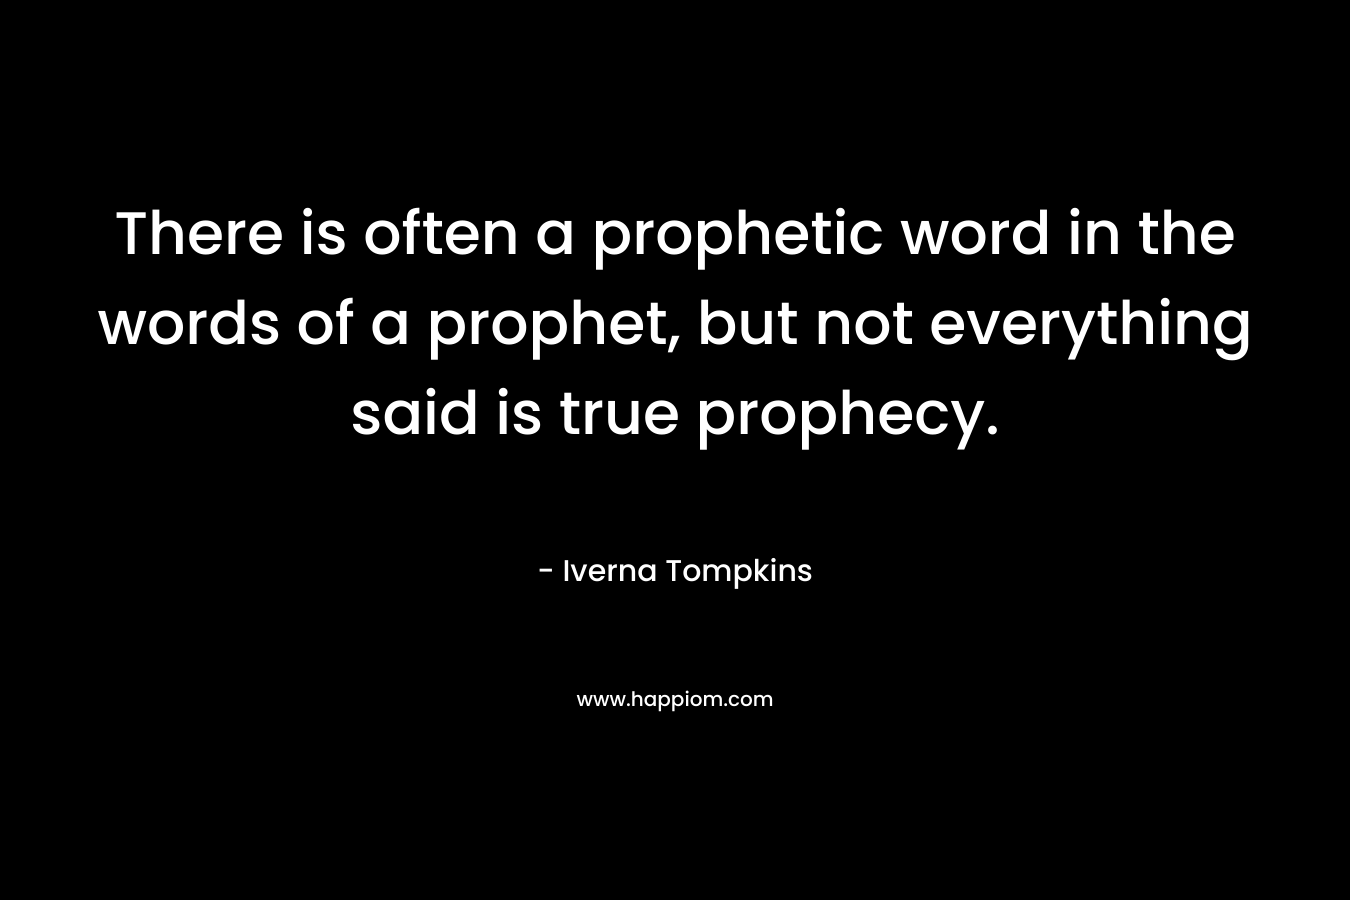 There is often a prophetic word in the words of a prophet, but not everything said is true prophecy.